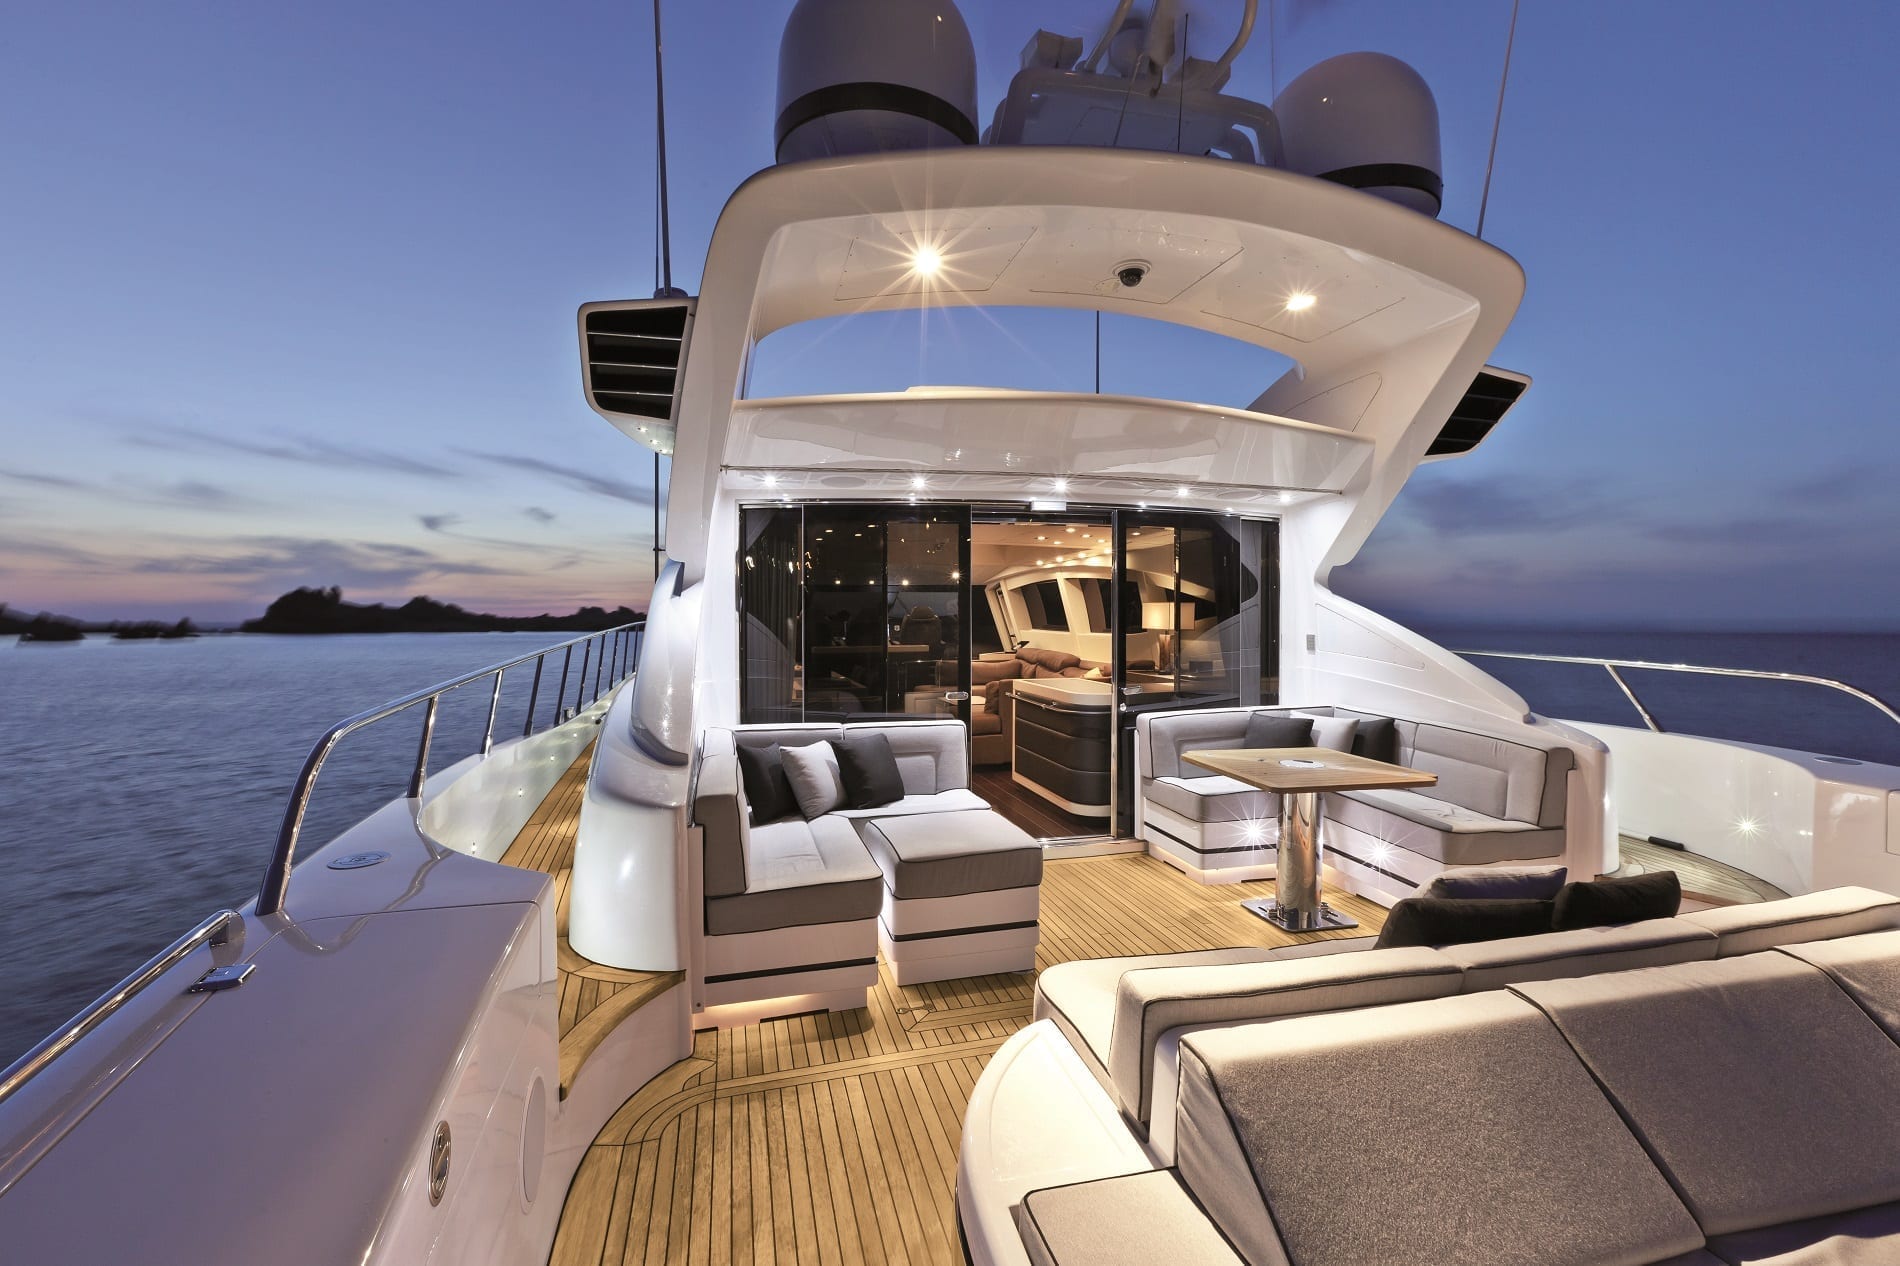 how to start a yacht charter company